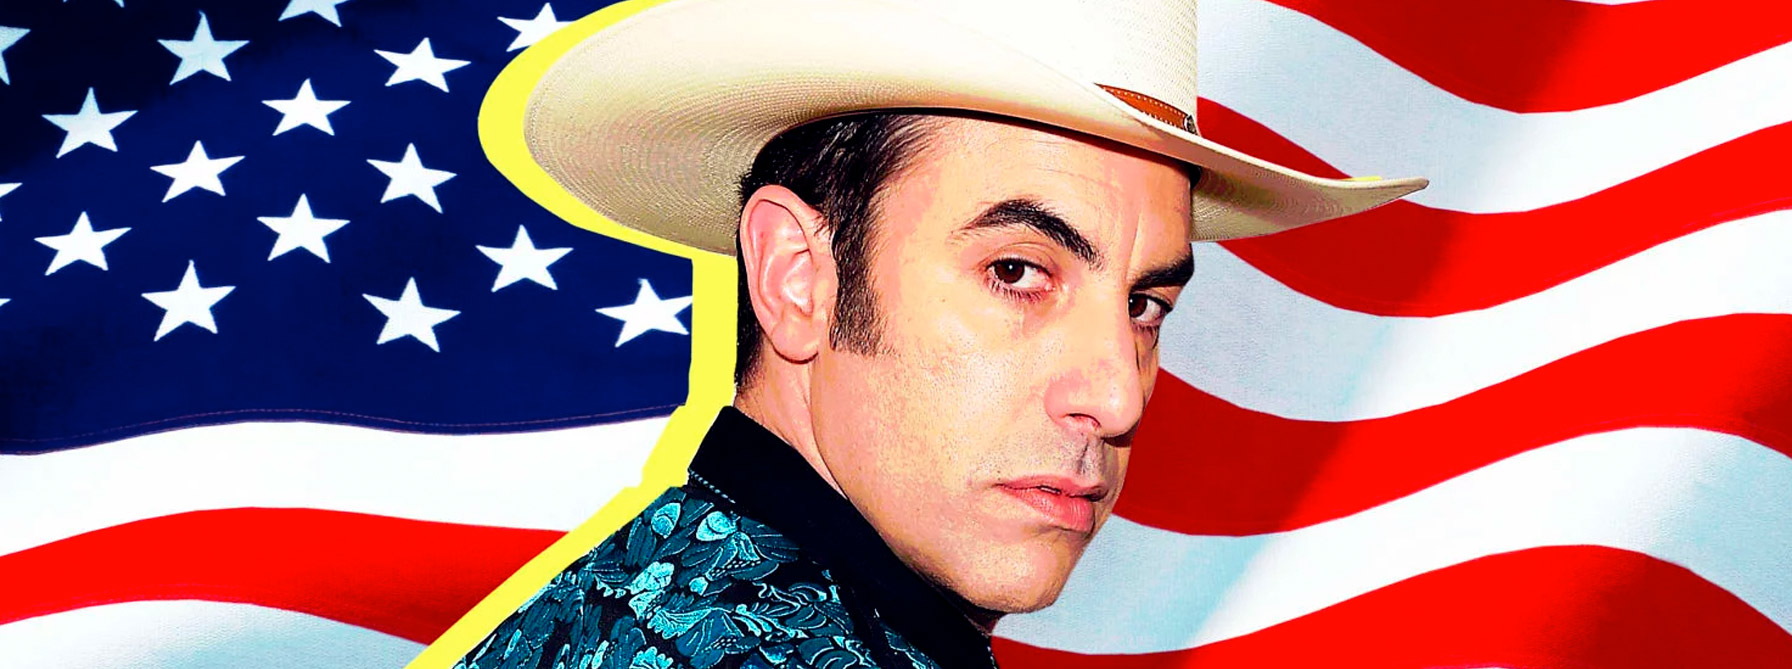 Who is America Sacha Baron Cohen's content marketing truths